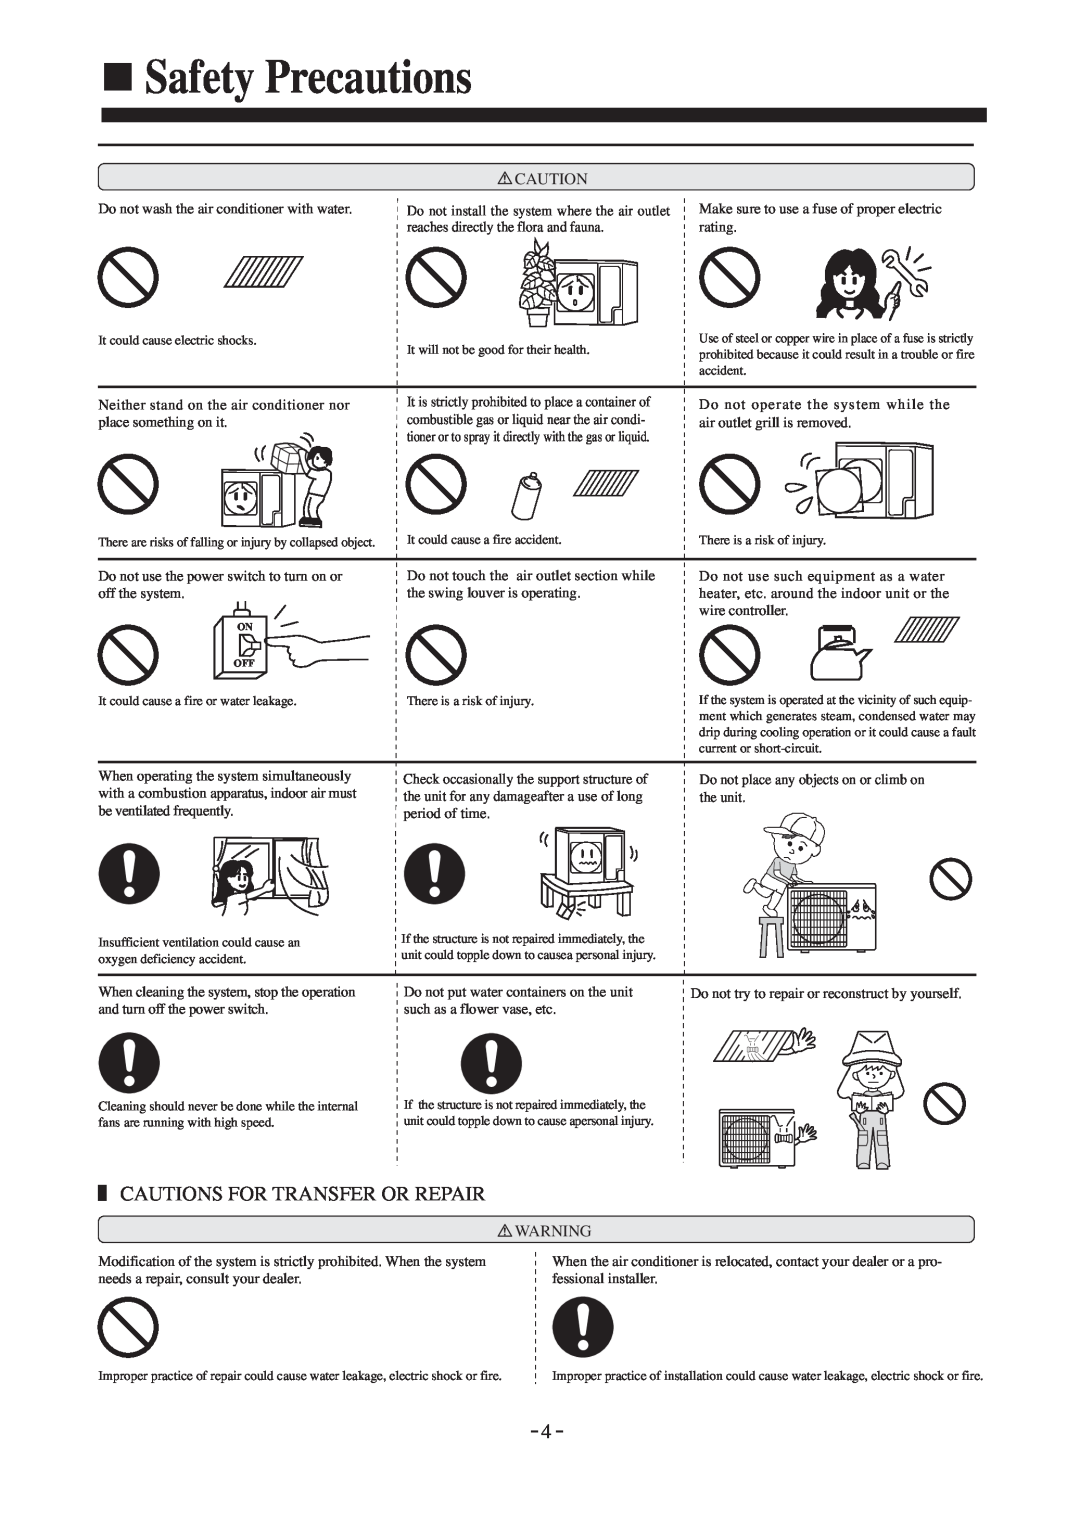 Haier HDU-42CF03/H installation manual Safety Precautions, Cautions For Transfer Or Repair 